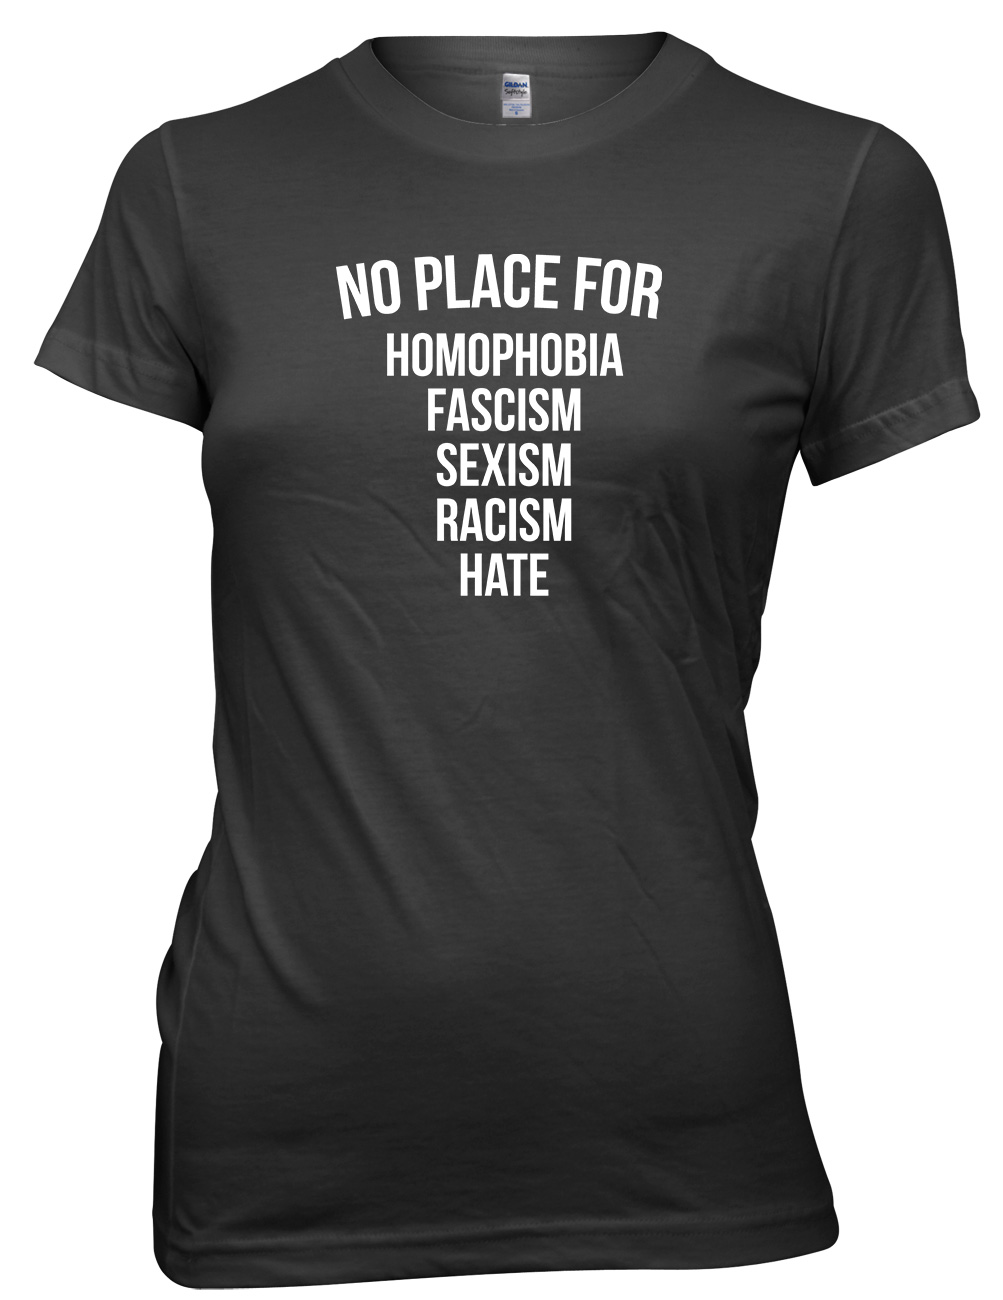 No Place For Homophobia, Fascism, Sexism, Racism, Hate Womens Ladies T ...